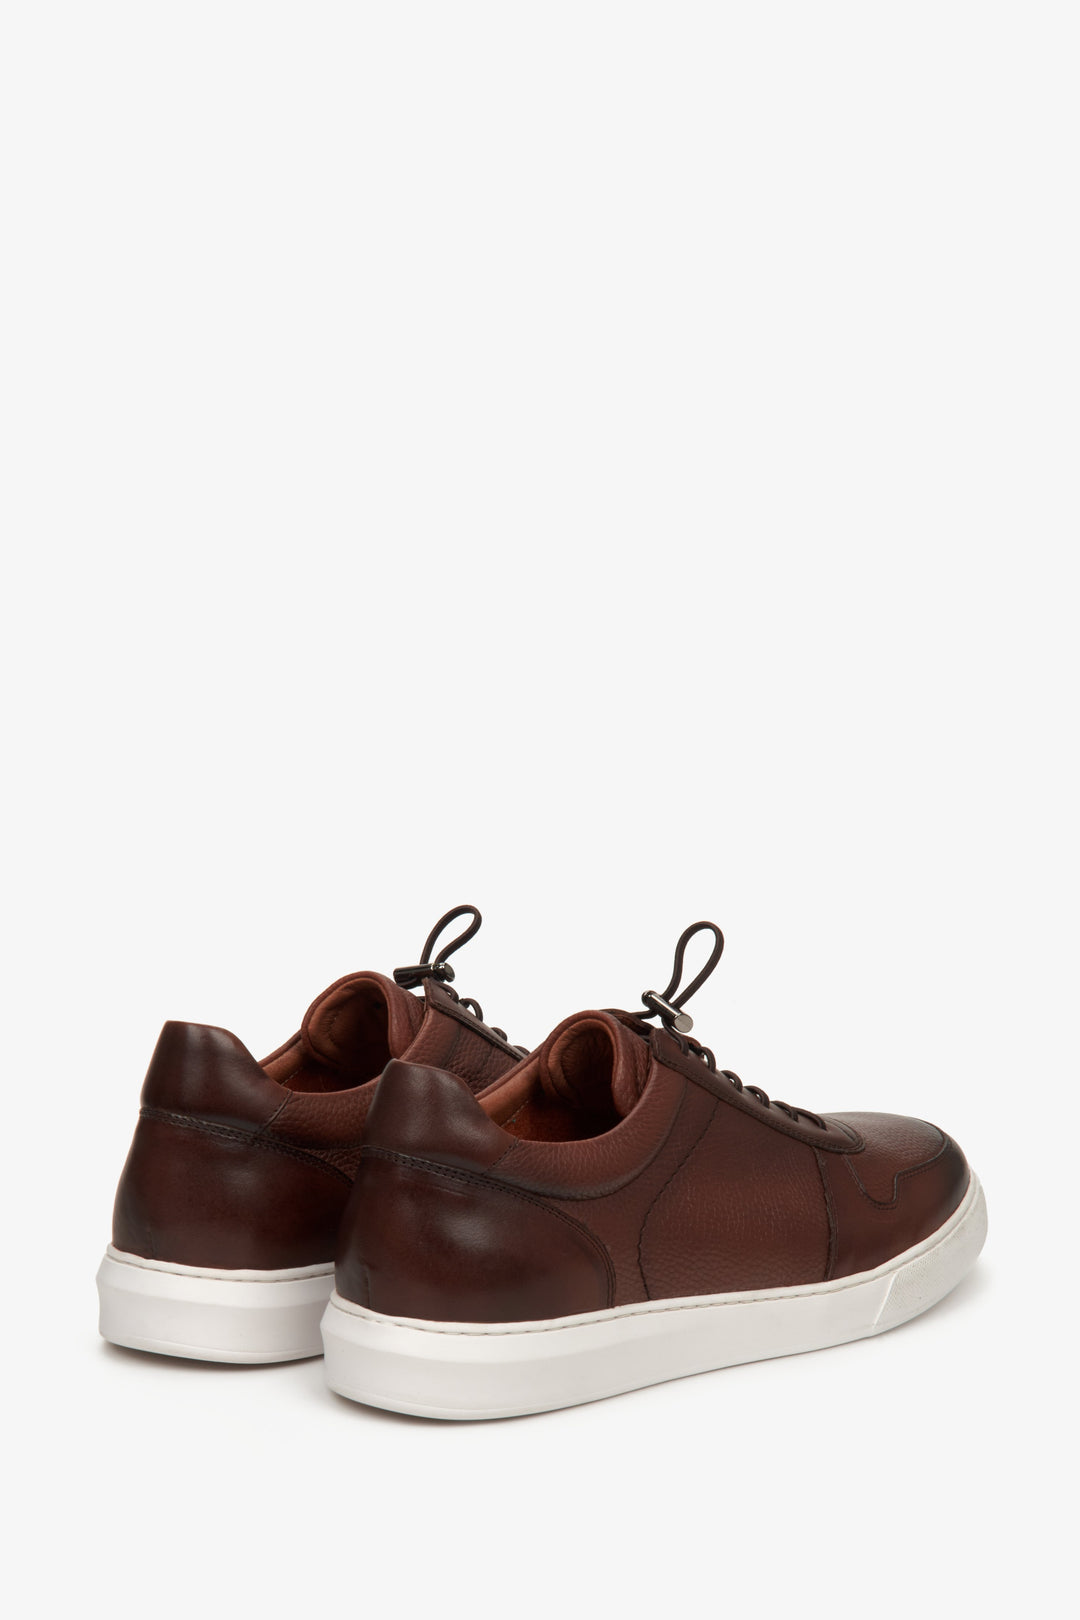 Estro men's brown leather sneakers - presentation of the heel and side seam of the shoes.